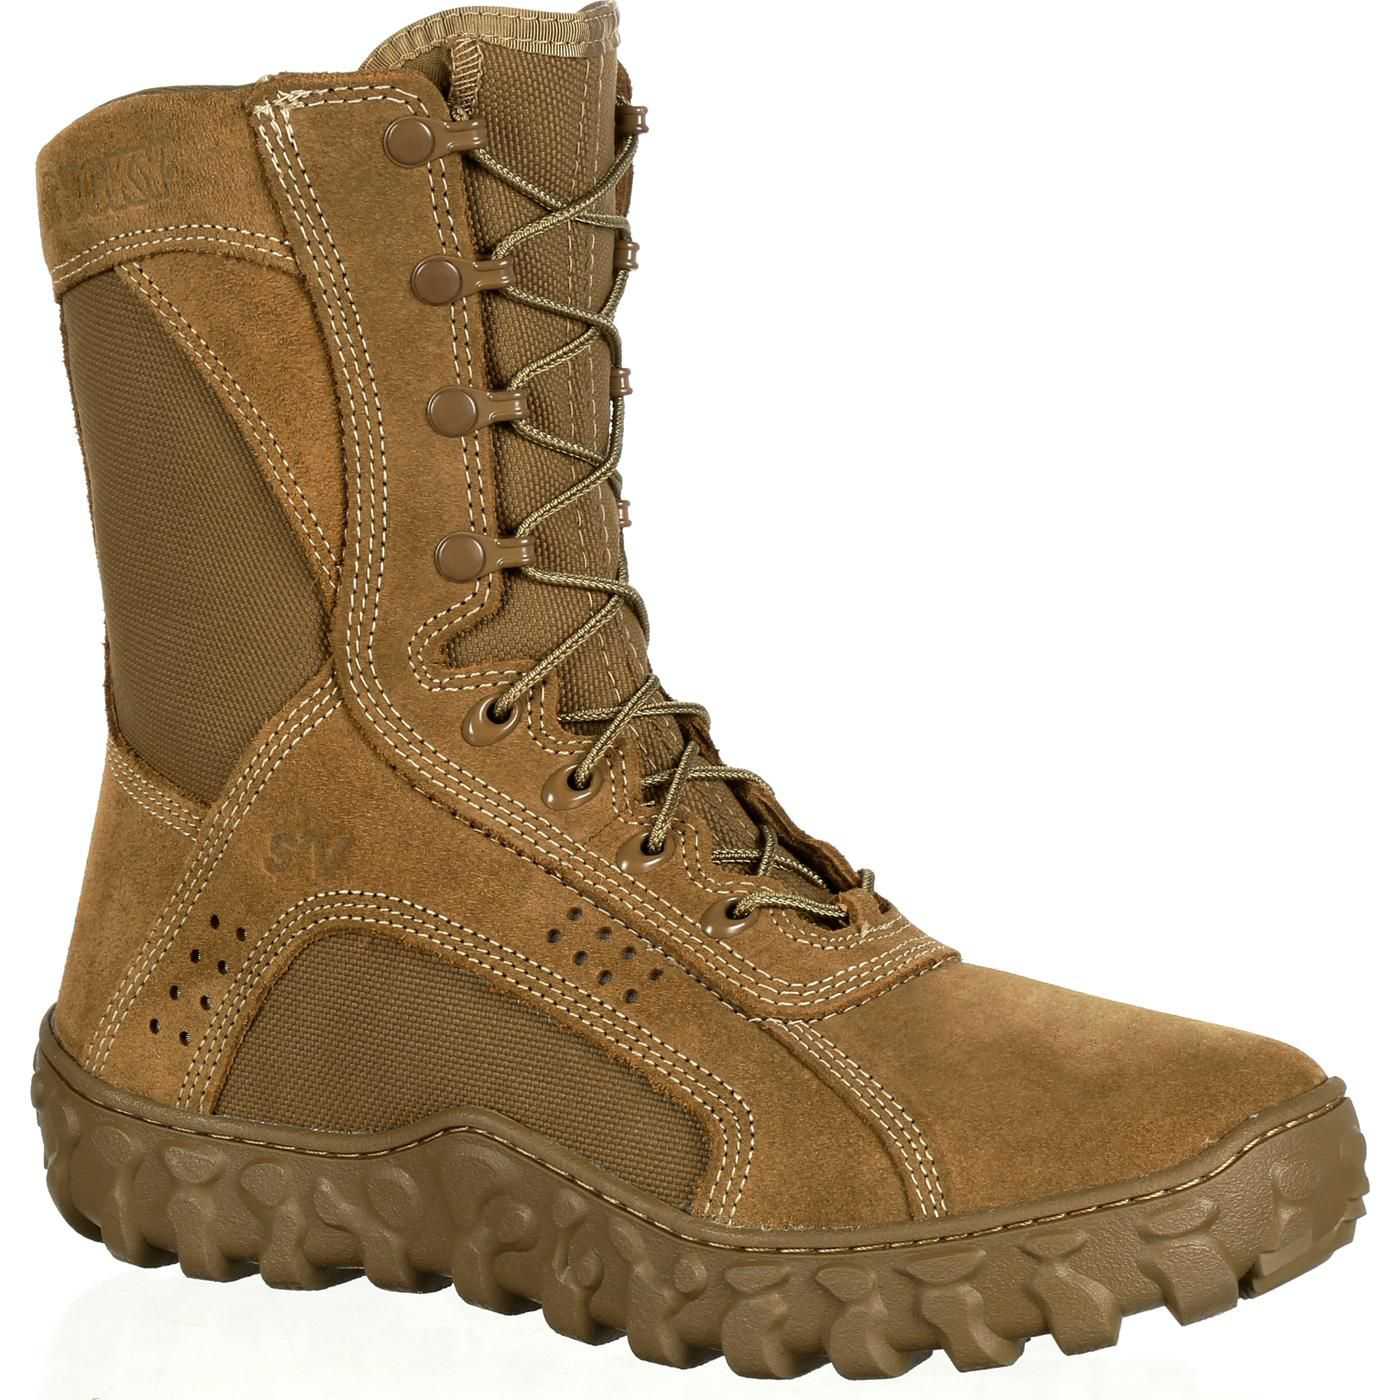 Rocky S2V Tactical Military Boots for Men - Coyote Brown - 12.5M